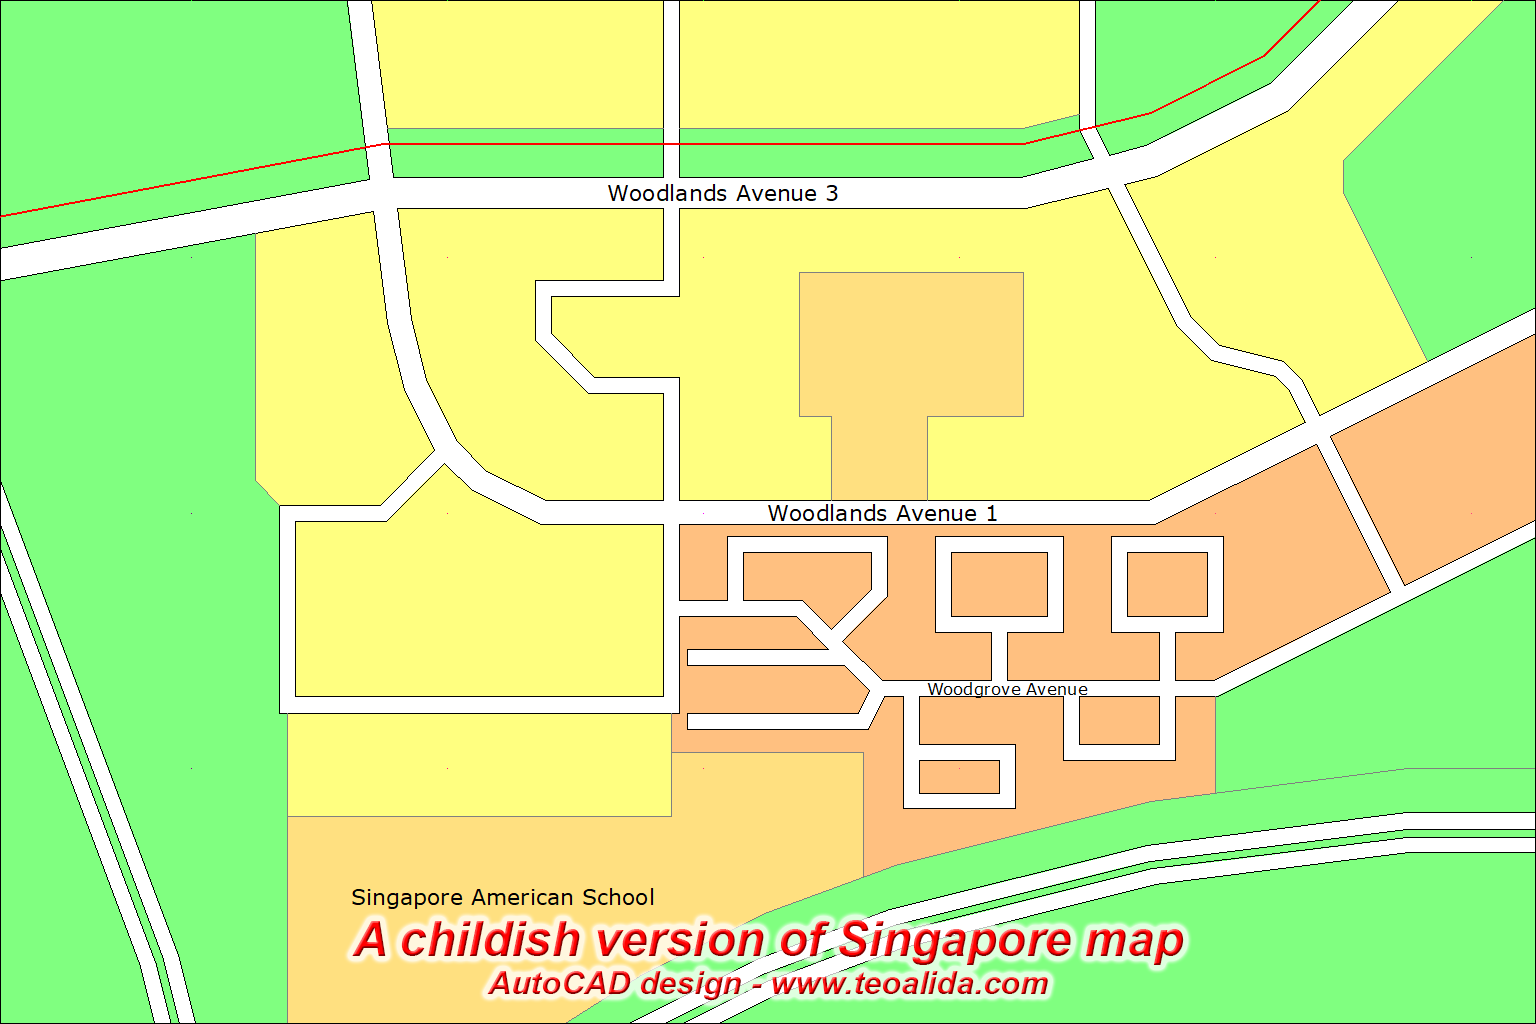 Coloured map of Singapore